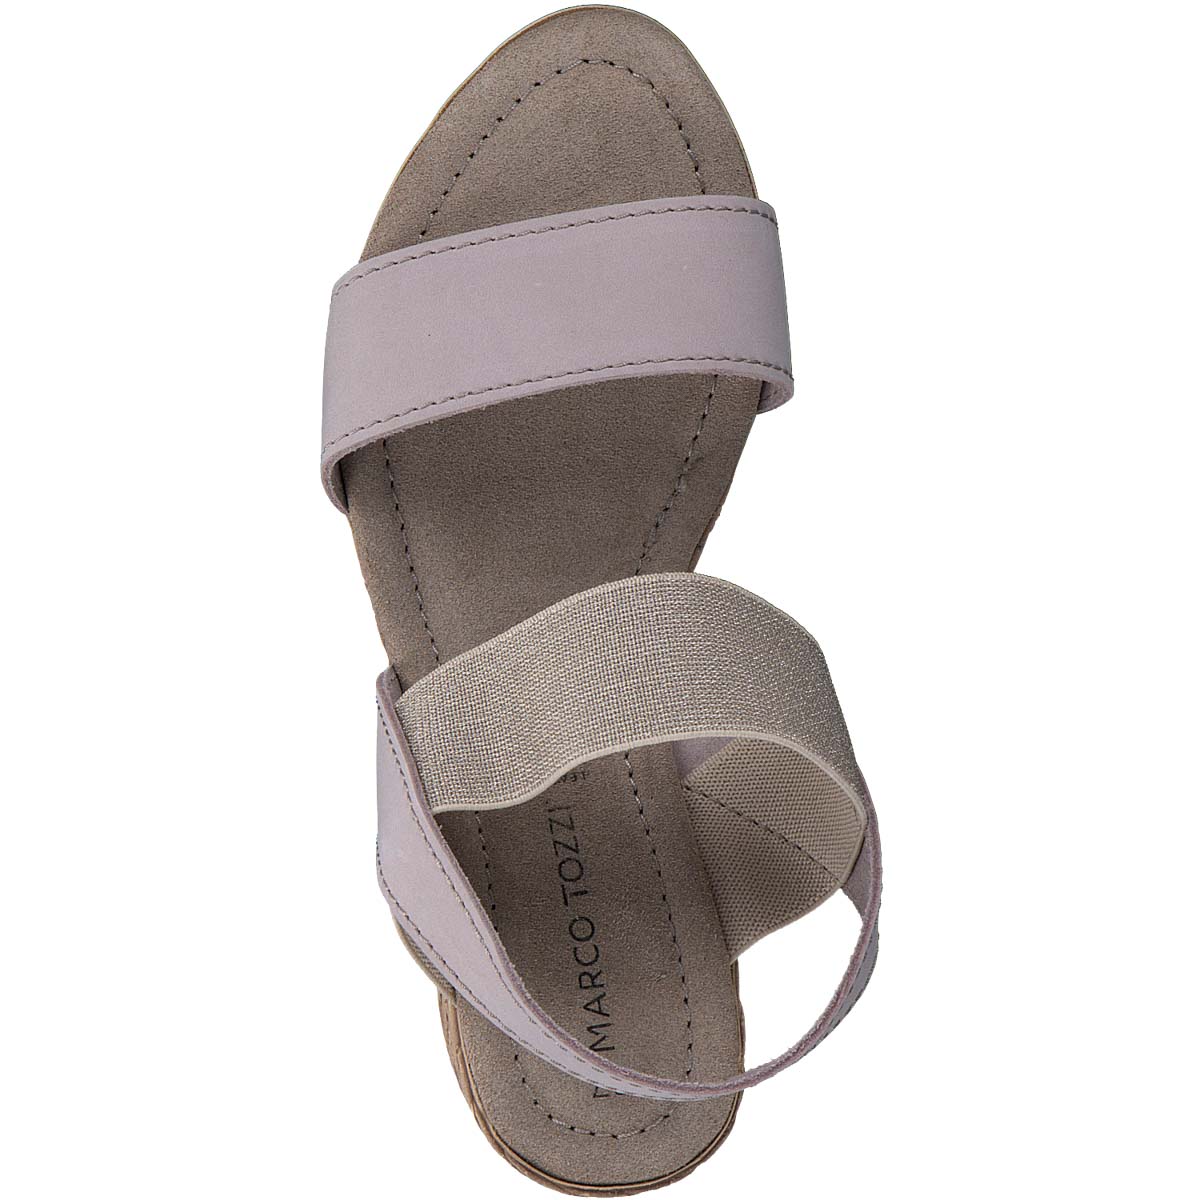 Island Getaway Espadrille Wedge Sandals for a Tropical Look